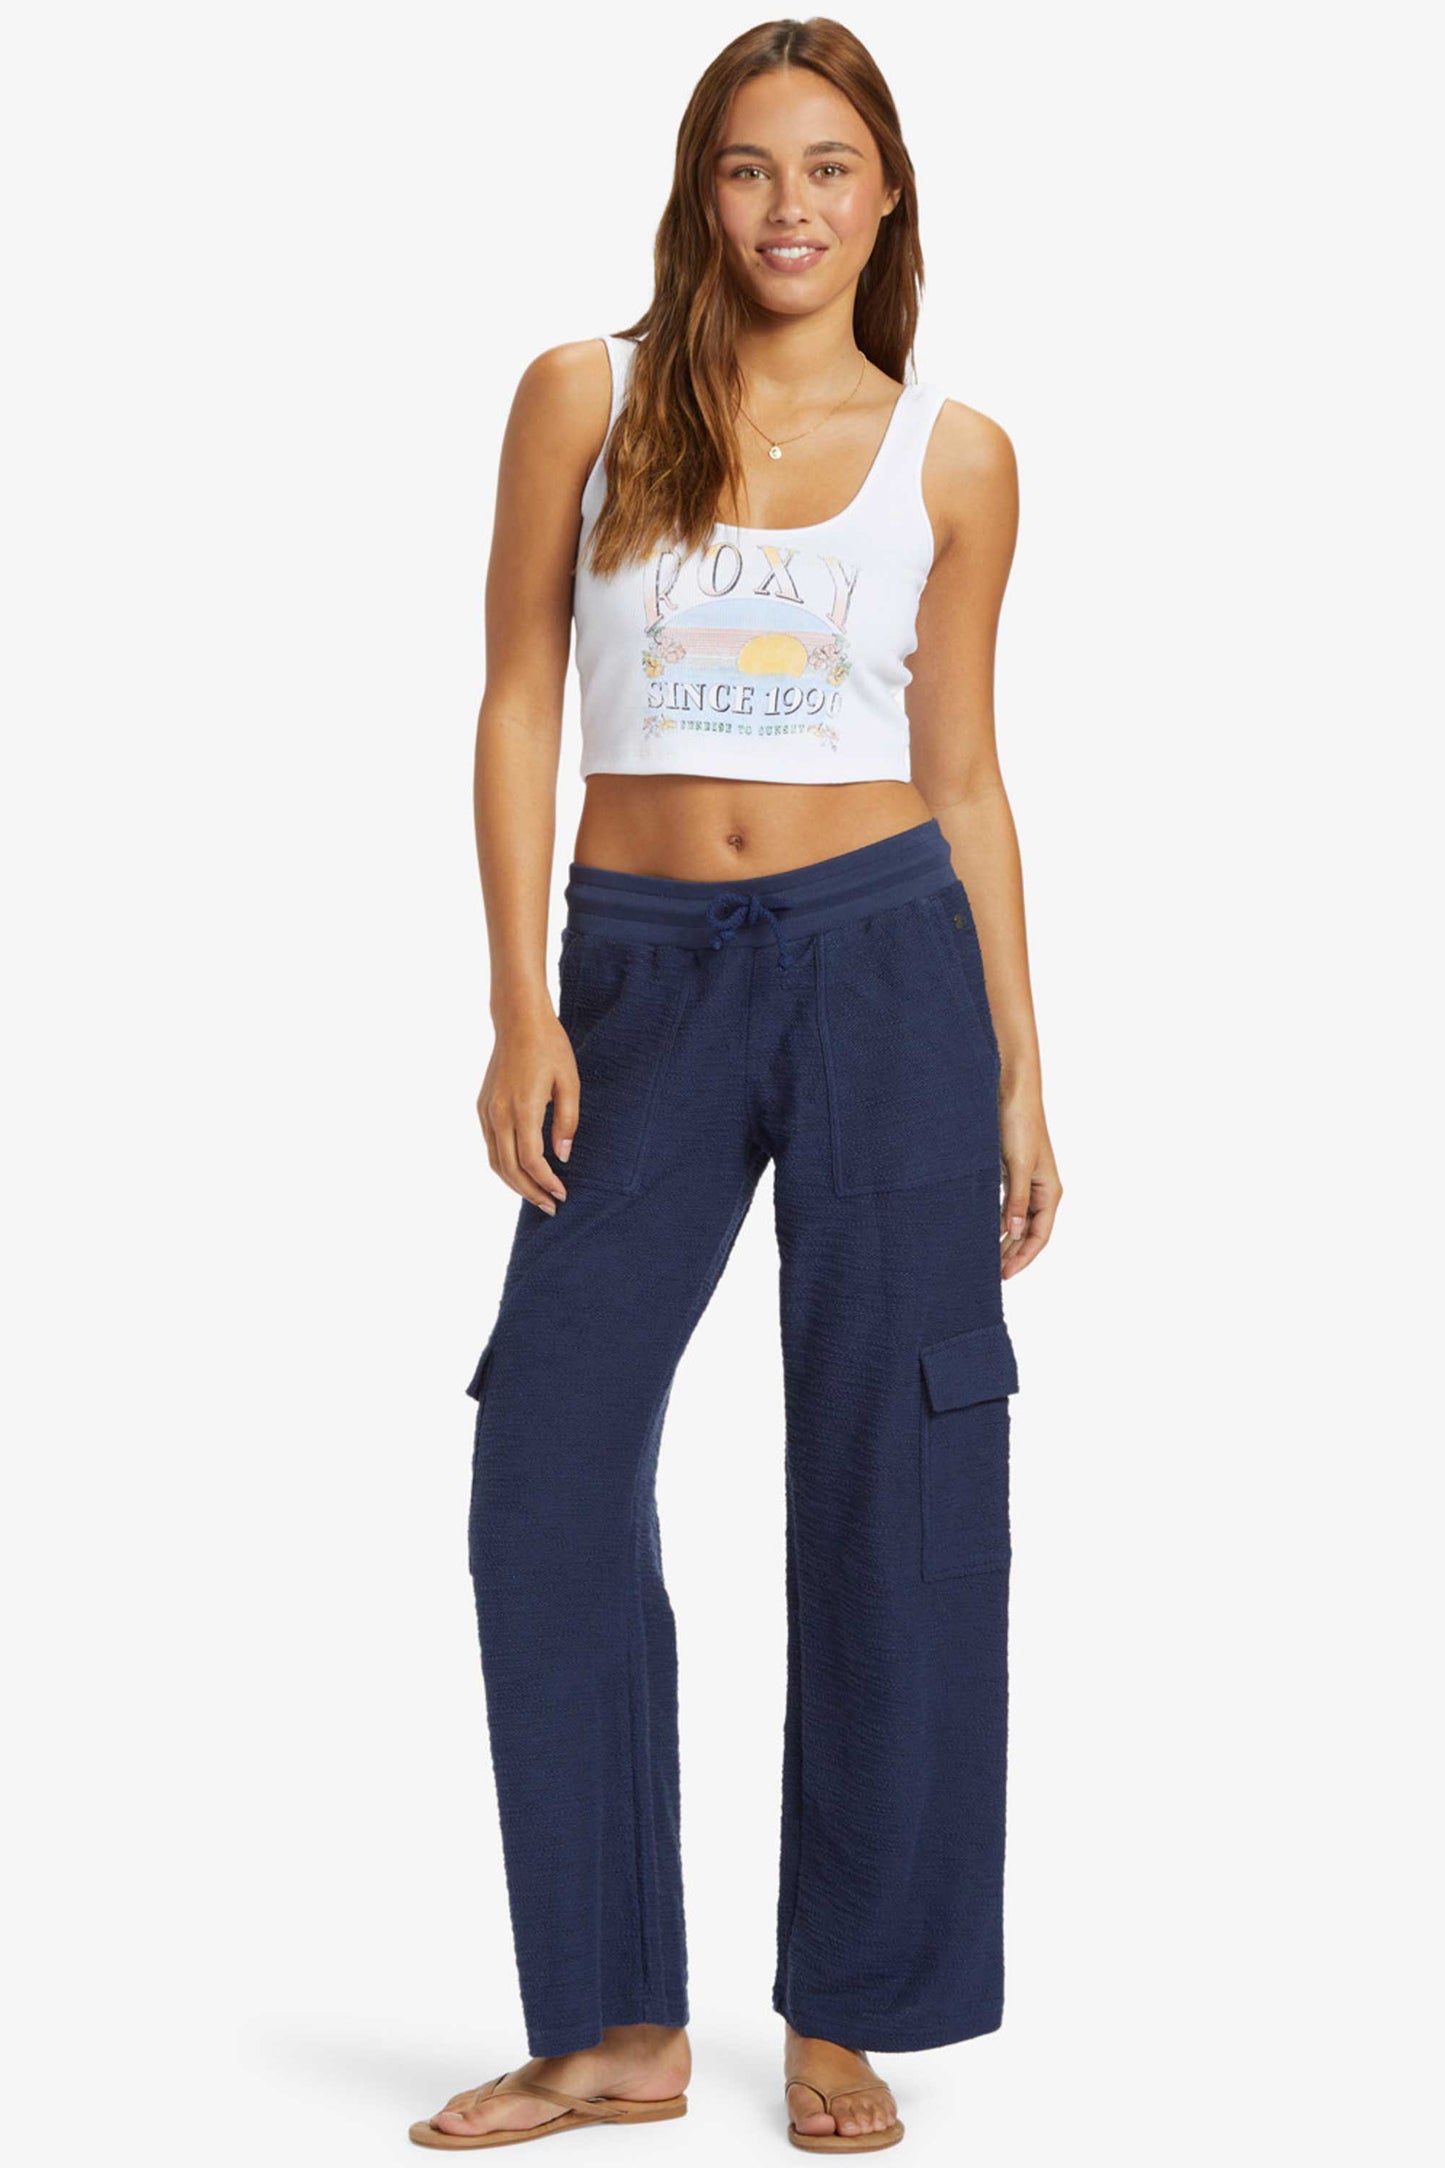 
                  
                    Pukas-Surf-Shop-roxy-woman-pant-off-the-hook-cargo-naval-academy
                  
                